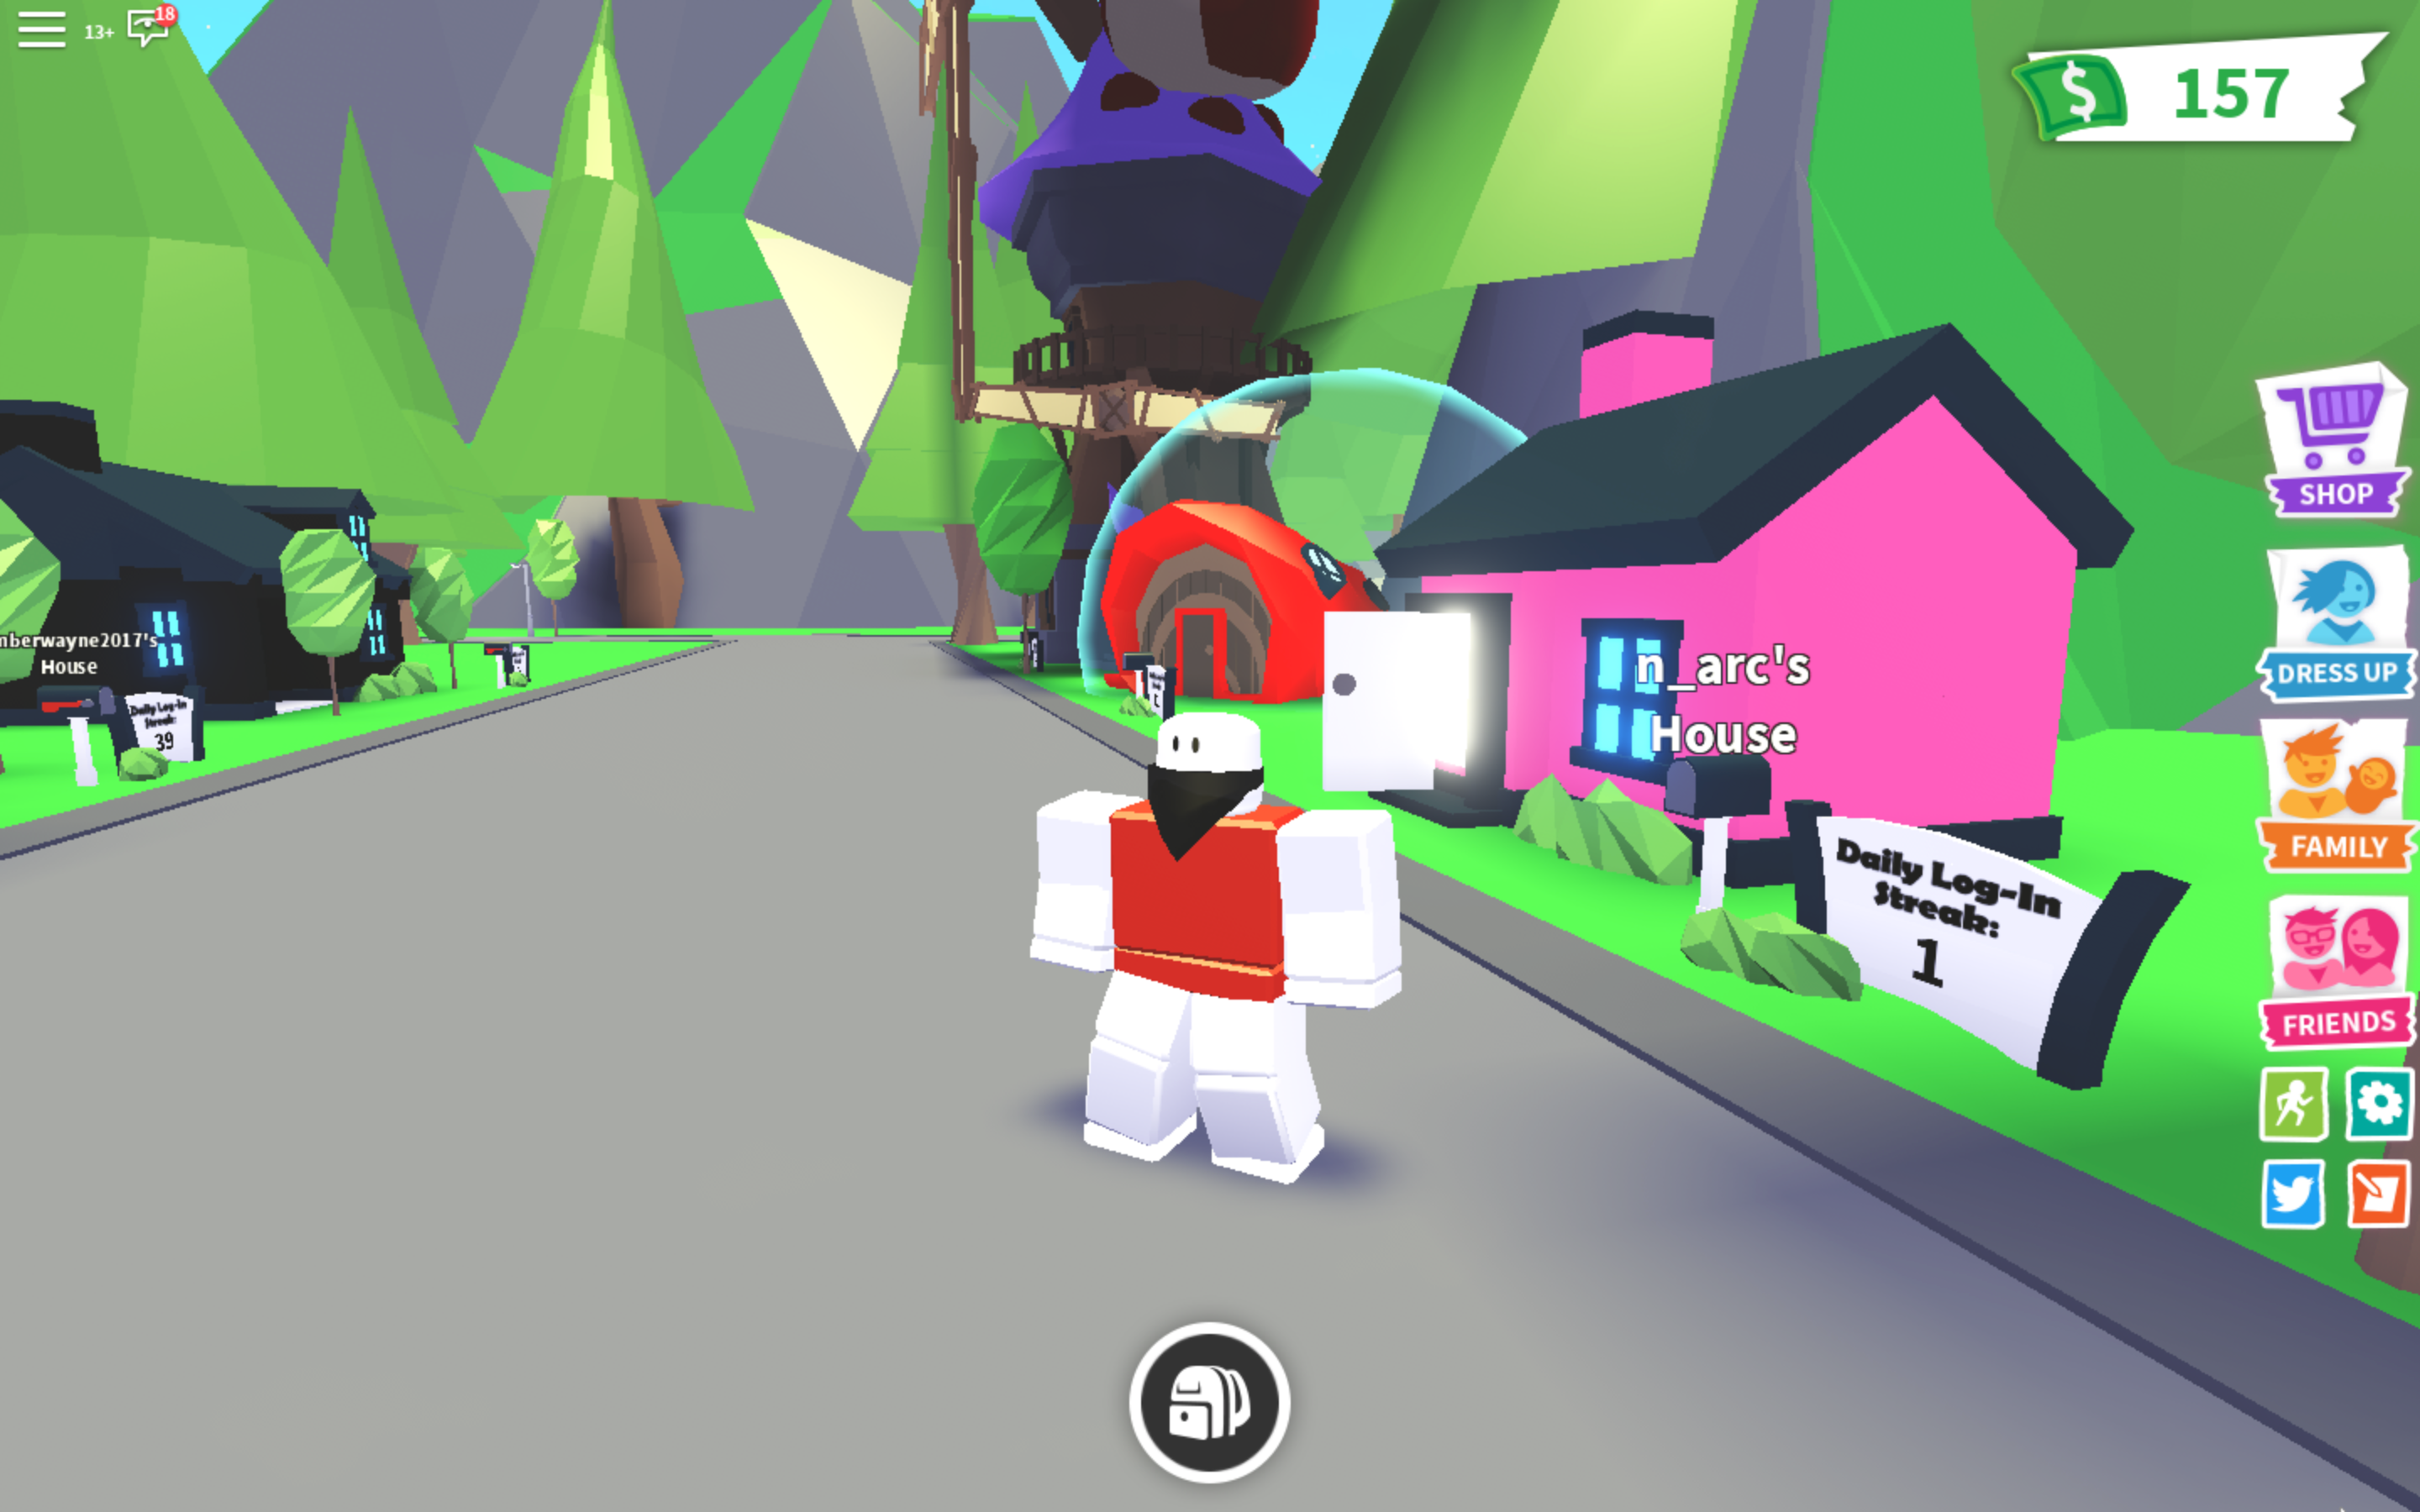 Game Review Adopt Me With A Cheerful And Delightful By N Arc Robloxradar Medium - roblox house inside adopt me